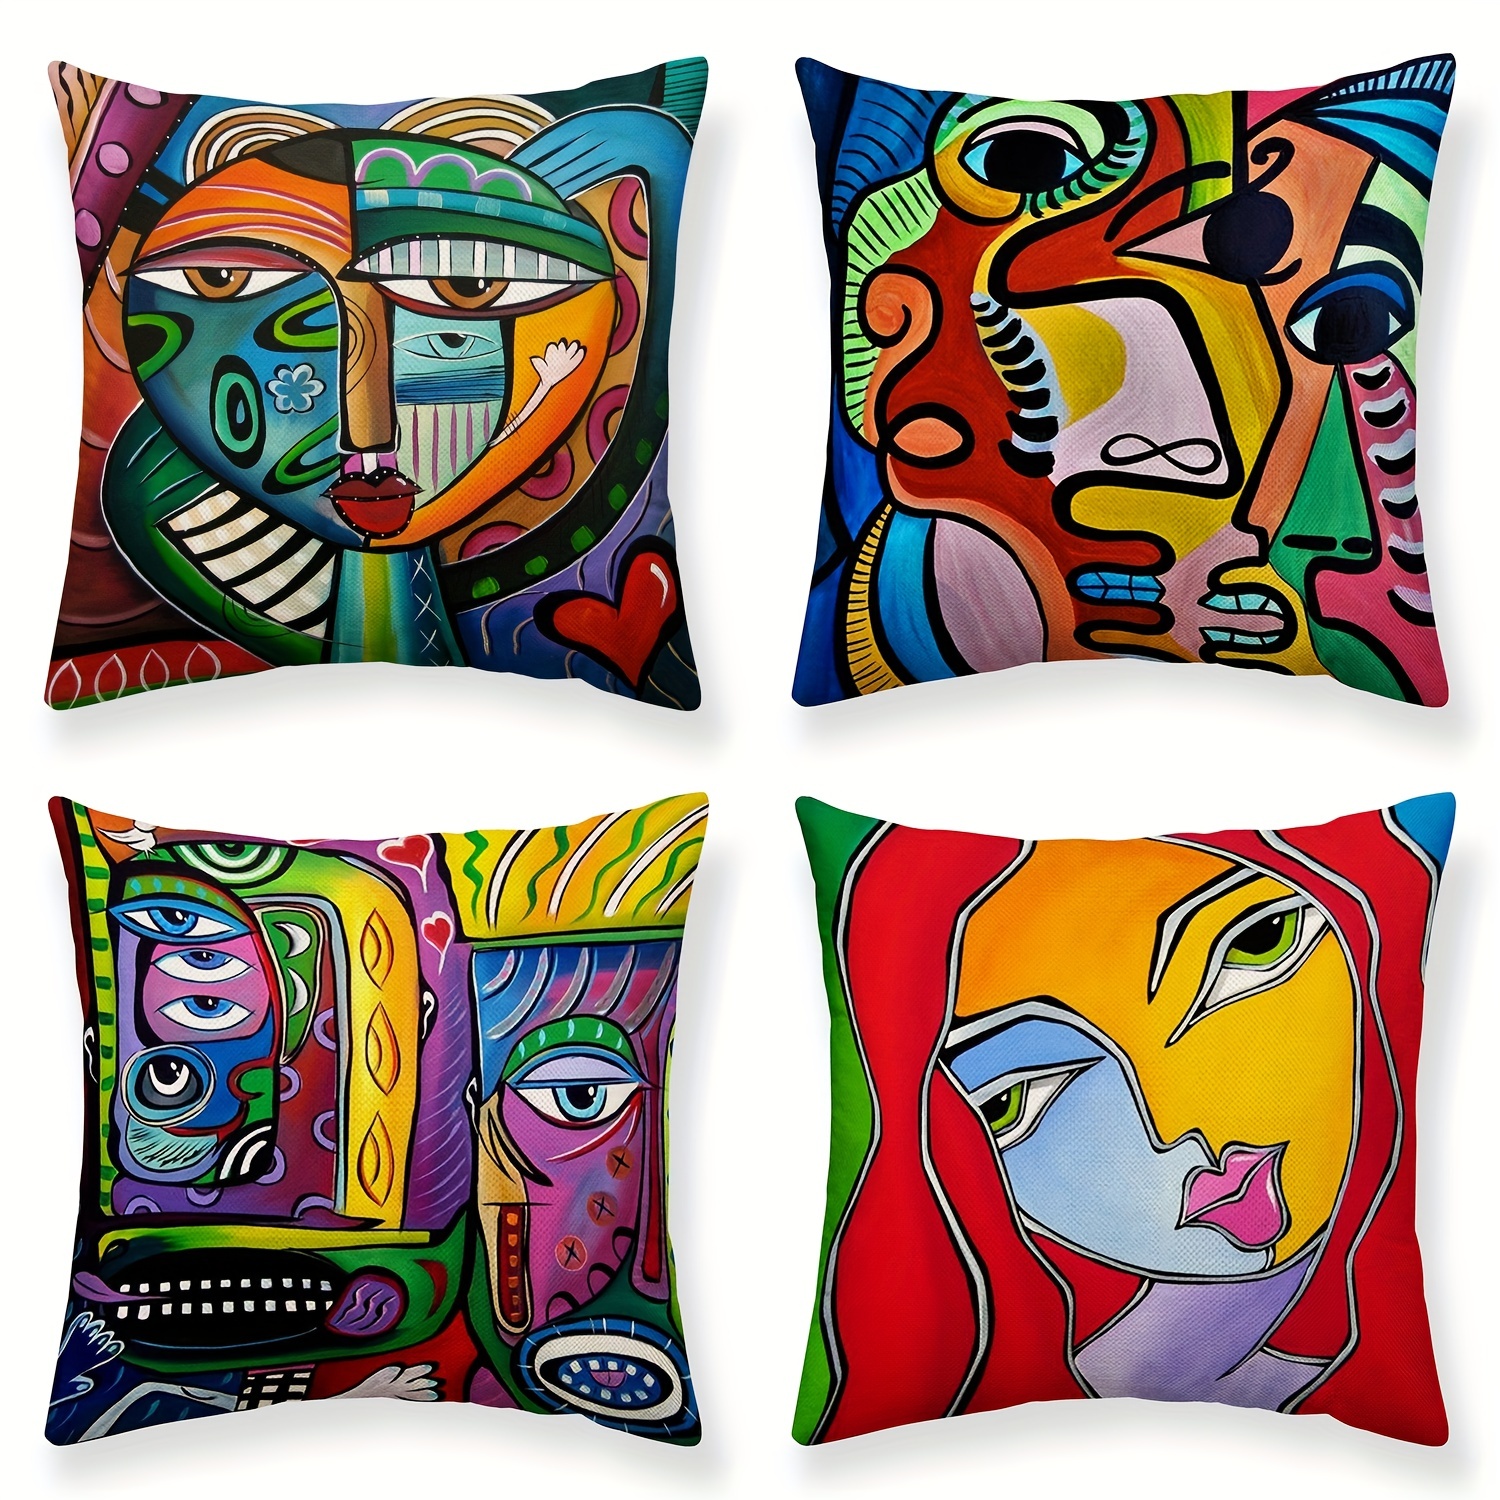 

4pcs Impressionist Pillow Cover Cushion Cover Painting Abstract Art Pillow Home Bedroom Sofa Car Seat Decoration Pillow 18inch*18inch (excluding Pillow Core)